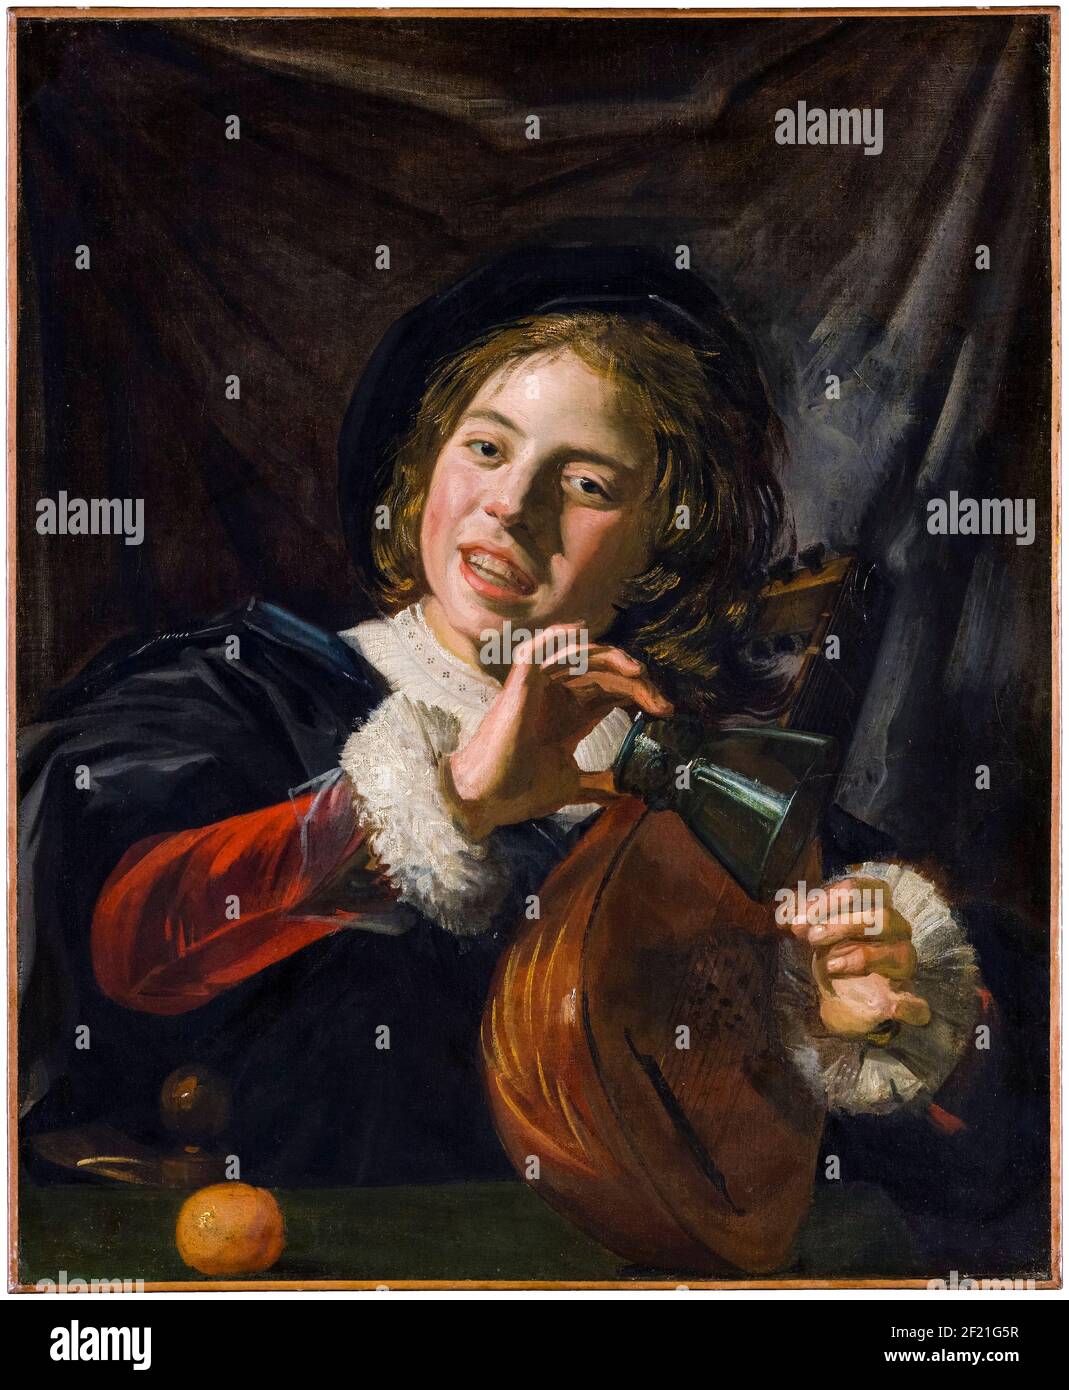 Frans Hals, Boy with a Lute, portrait painting, circa 1625 Stock Photo